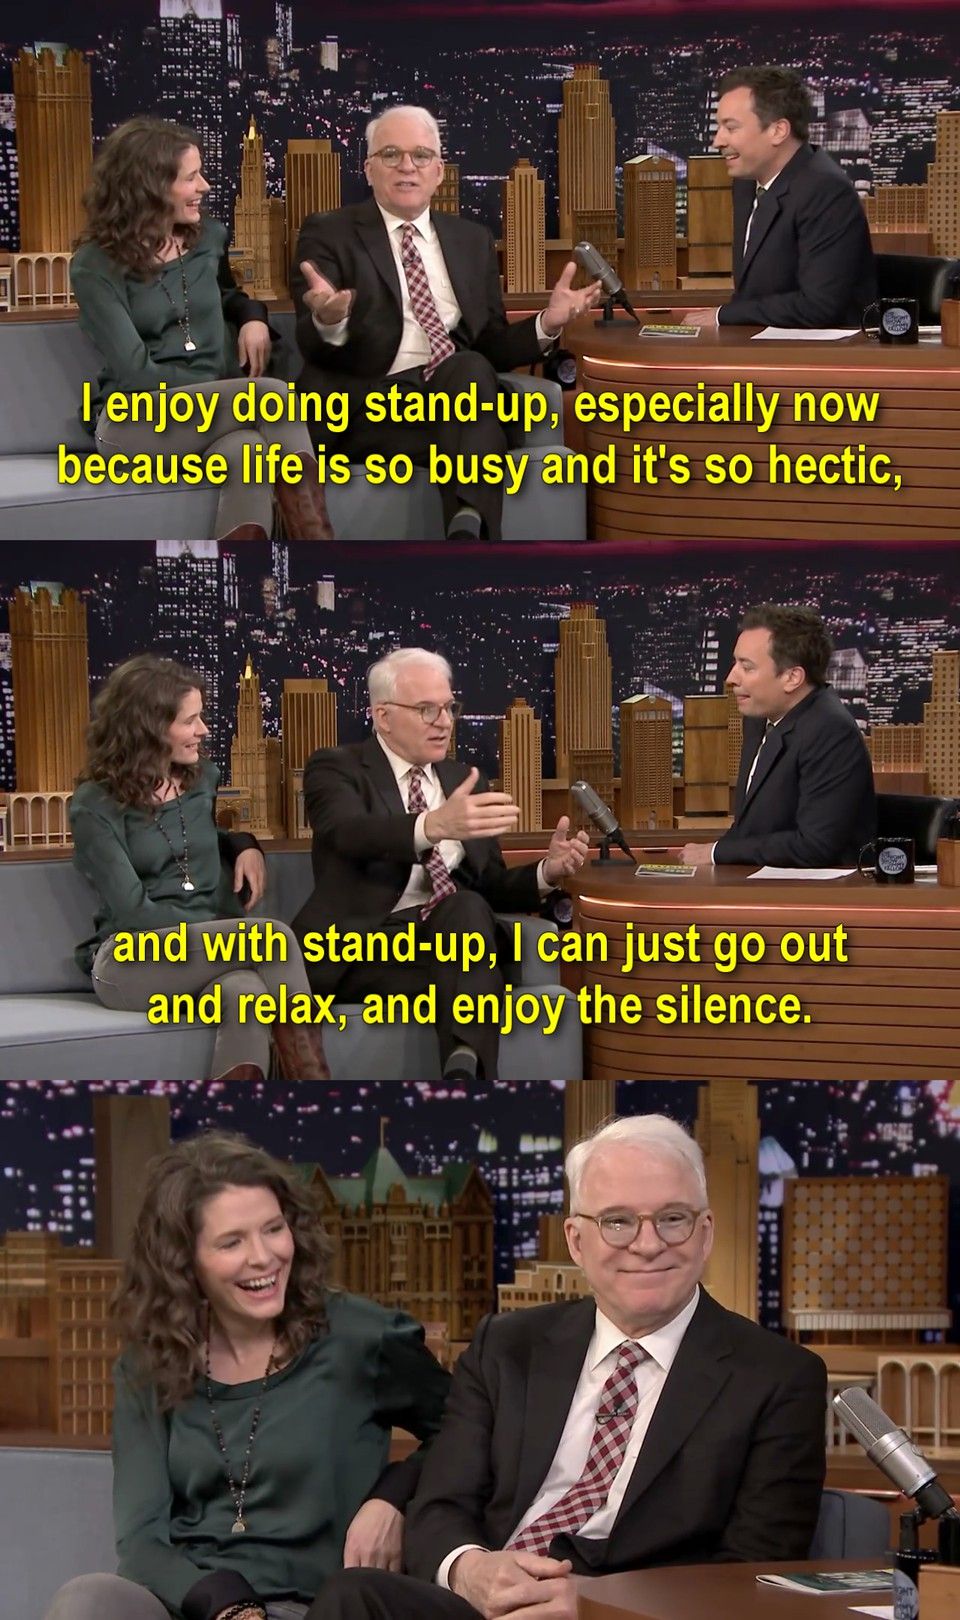 Steve Martin on why he does stand up